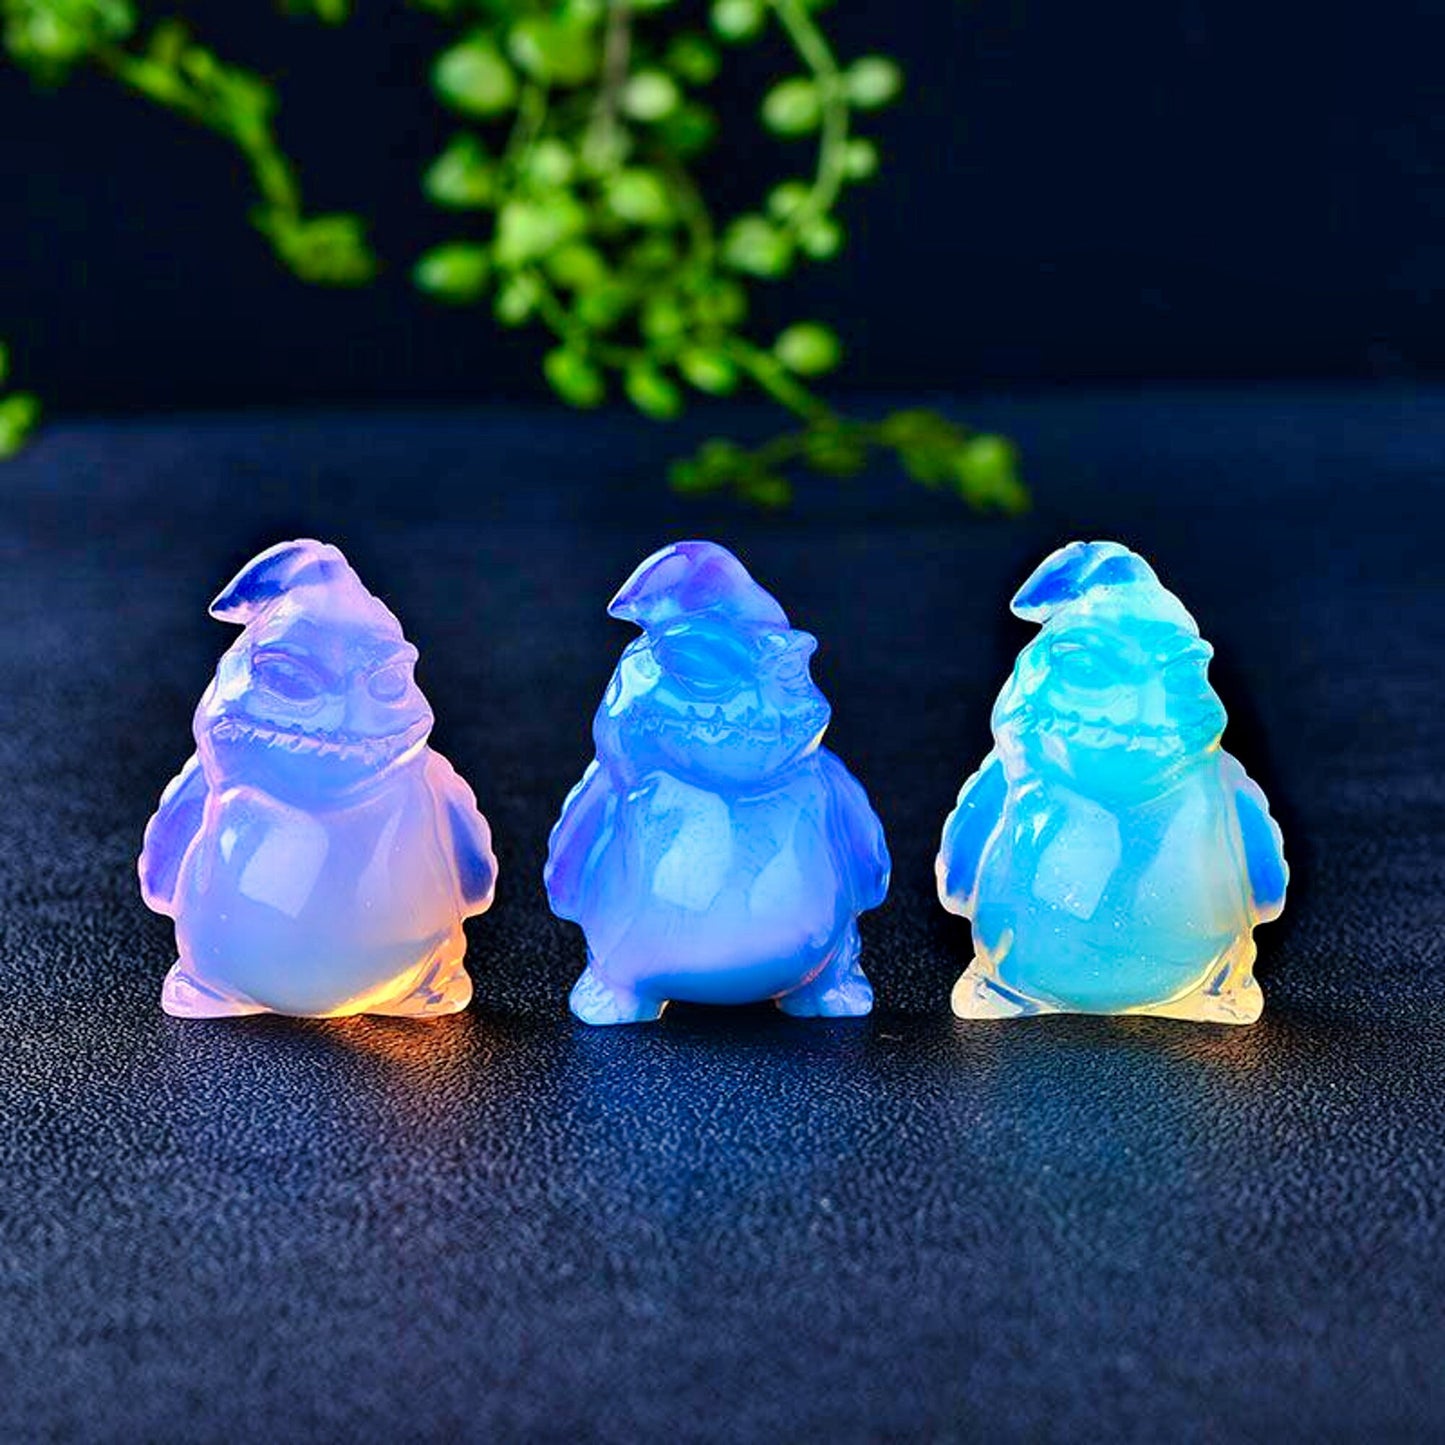 Natural Opal Stone Bag Clown Hand Carved Crystal Figurine - Set of 3 | Fashion Home Decor Gift